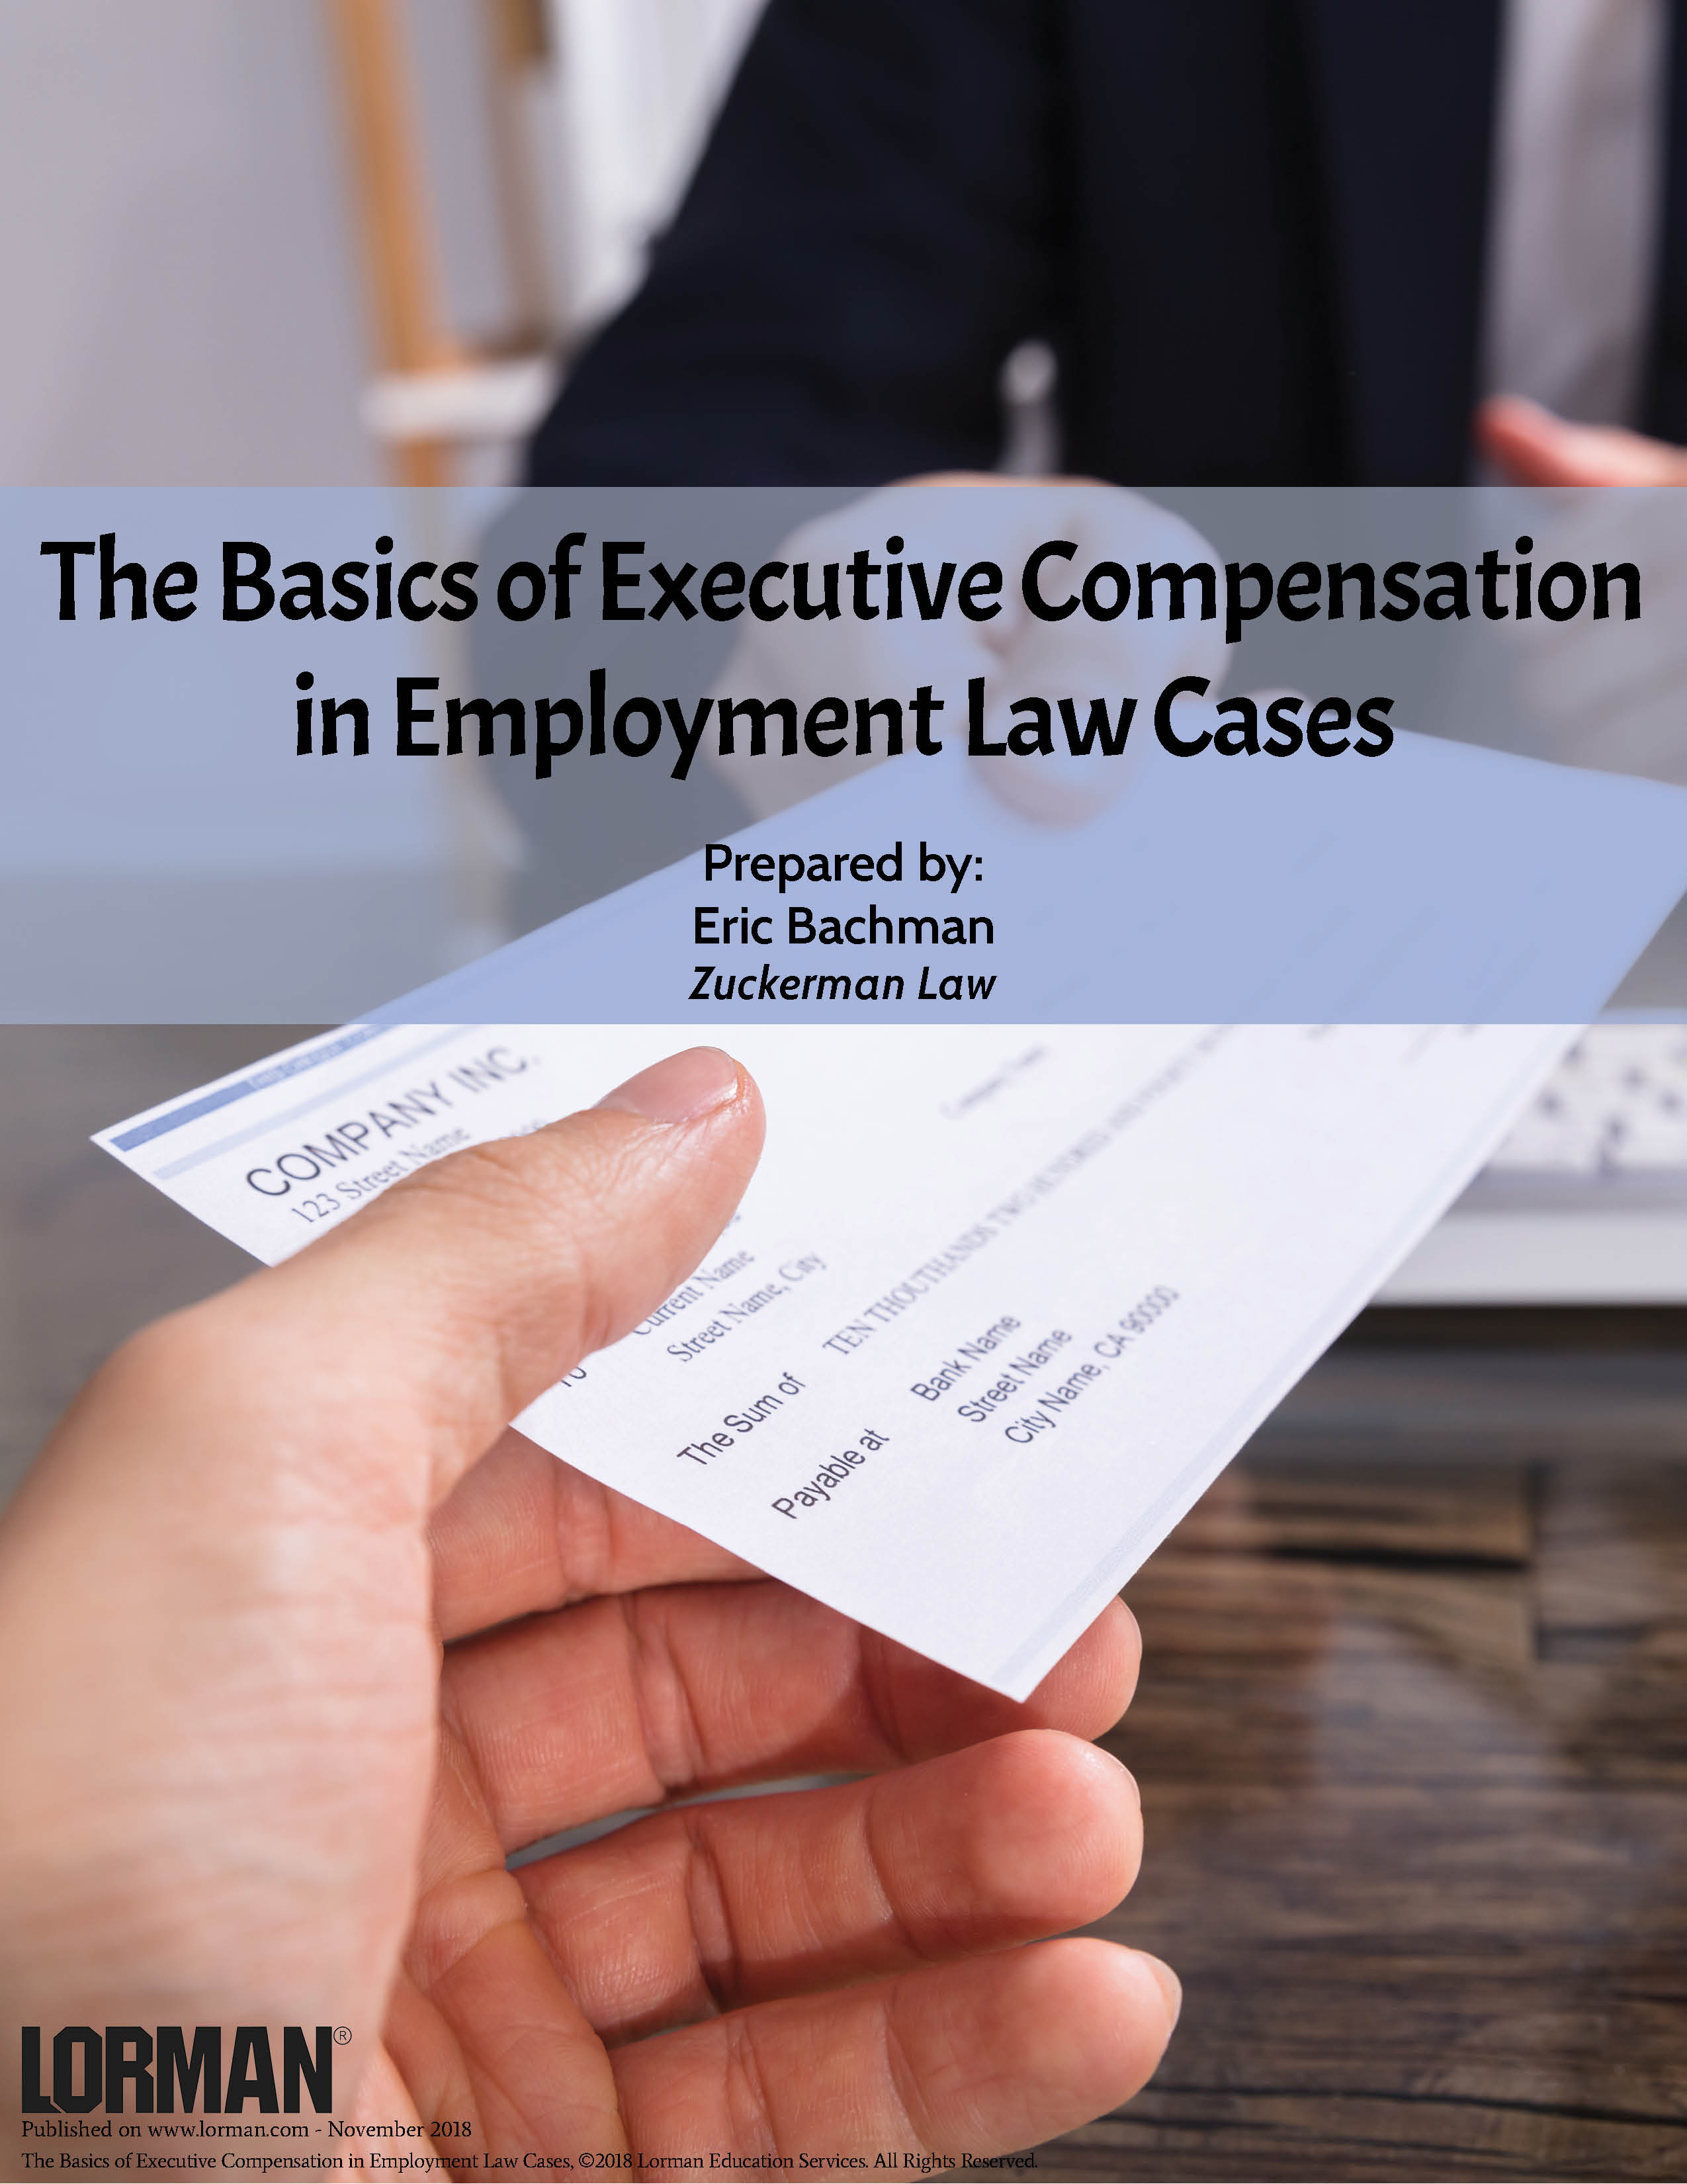 The Basics of Executive Compensation in Employment Law Cases